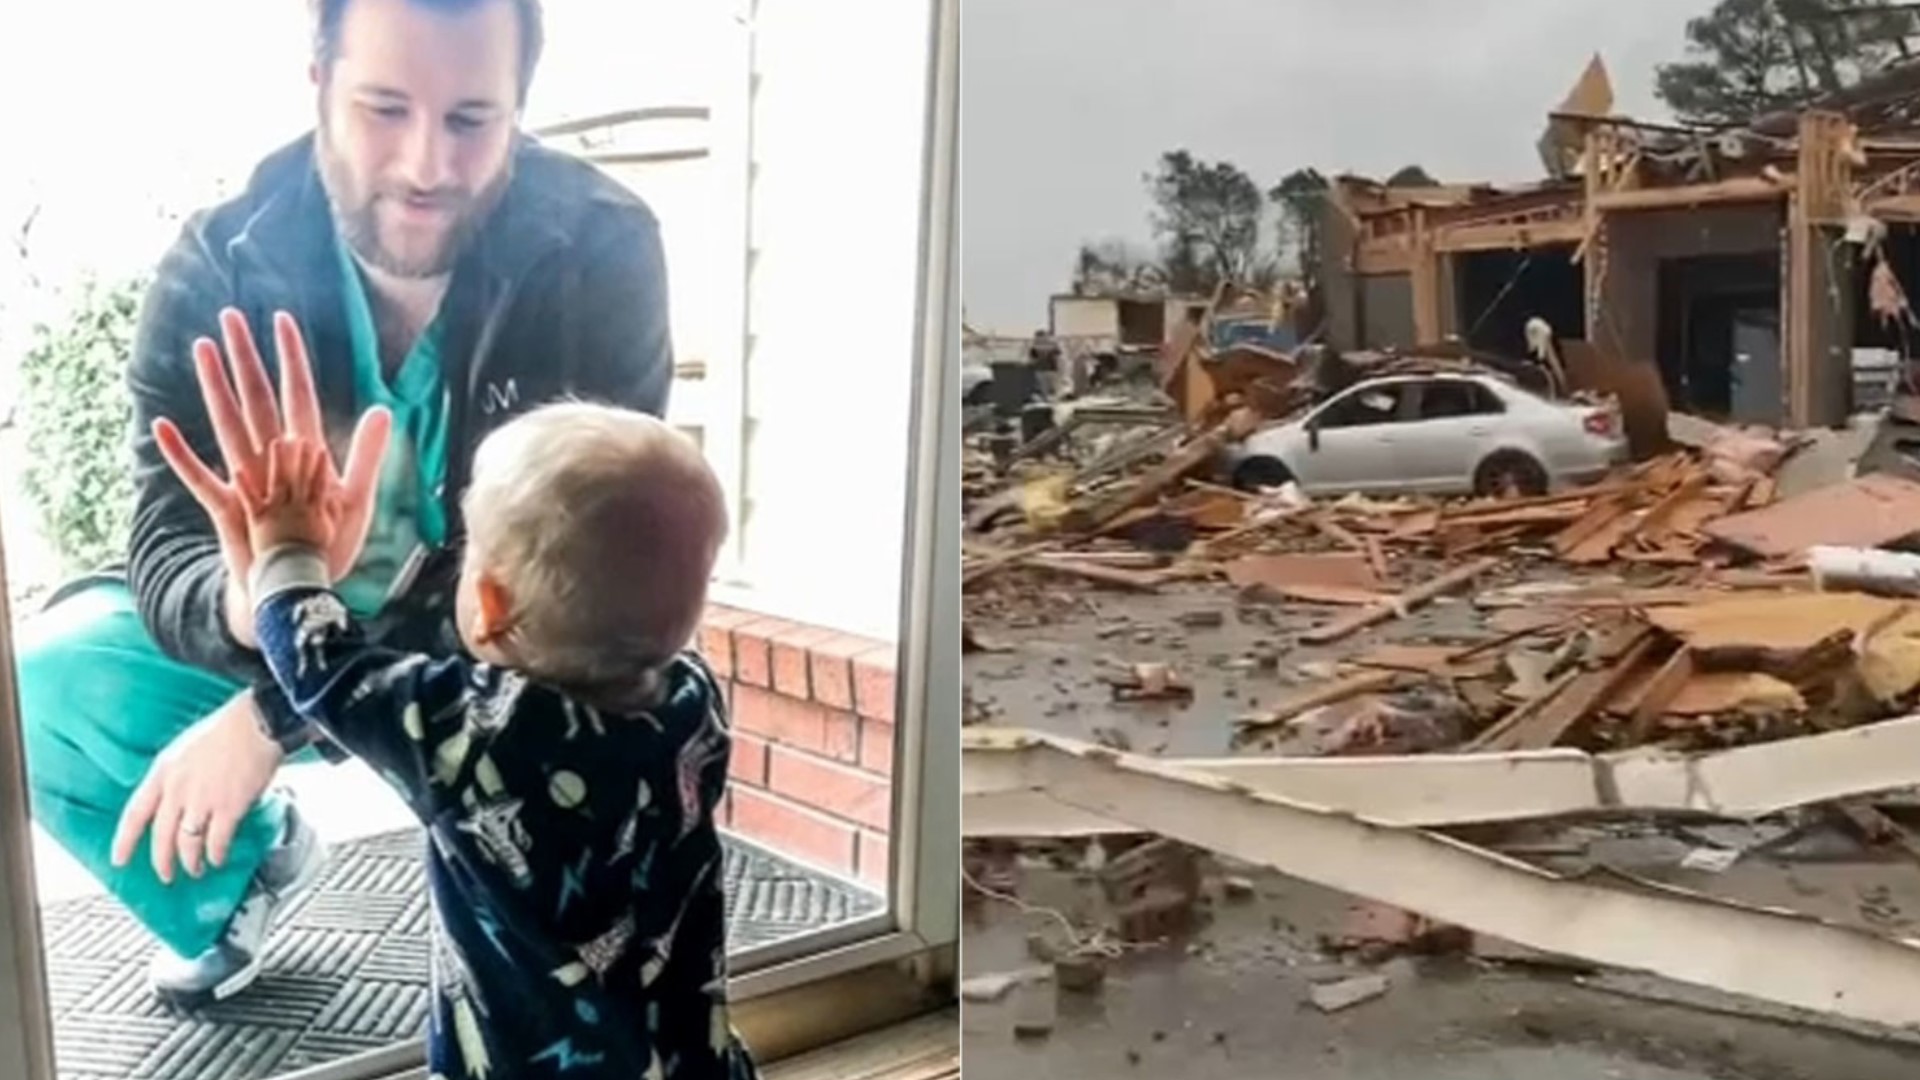 The physician narrowly escaped death on Saturday when a tornado ripped through his community and destroyed his house.